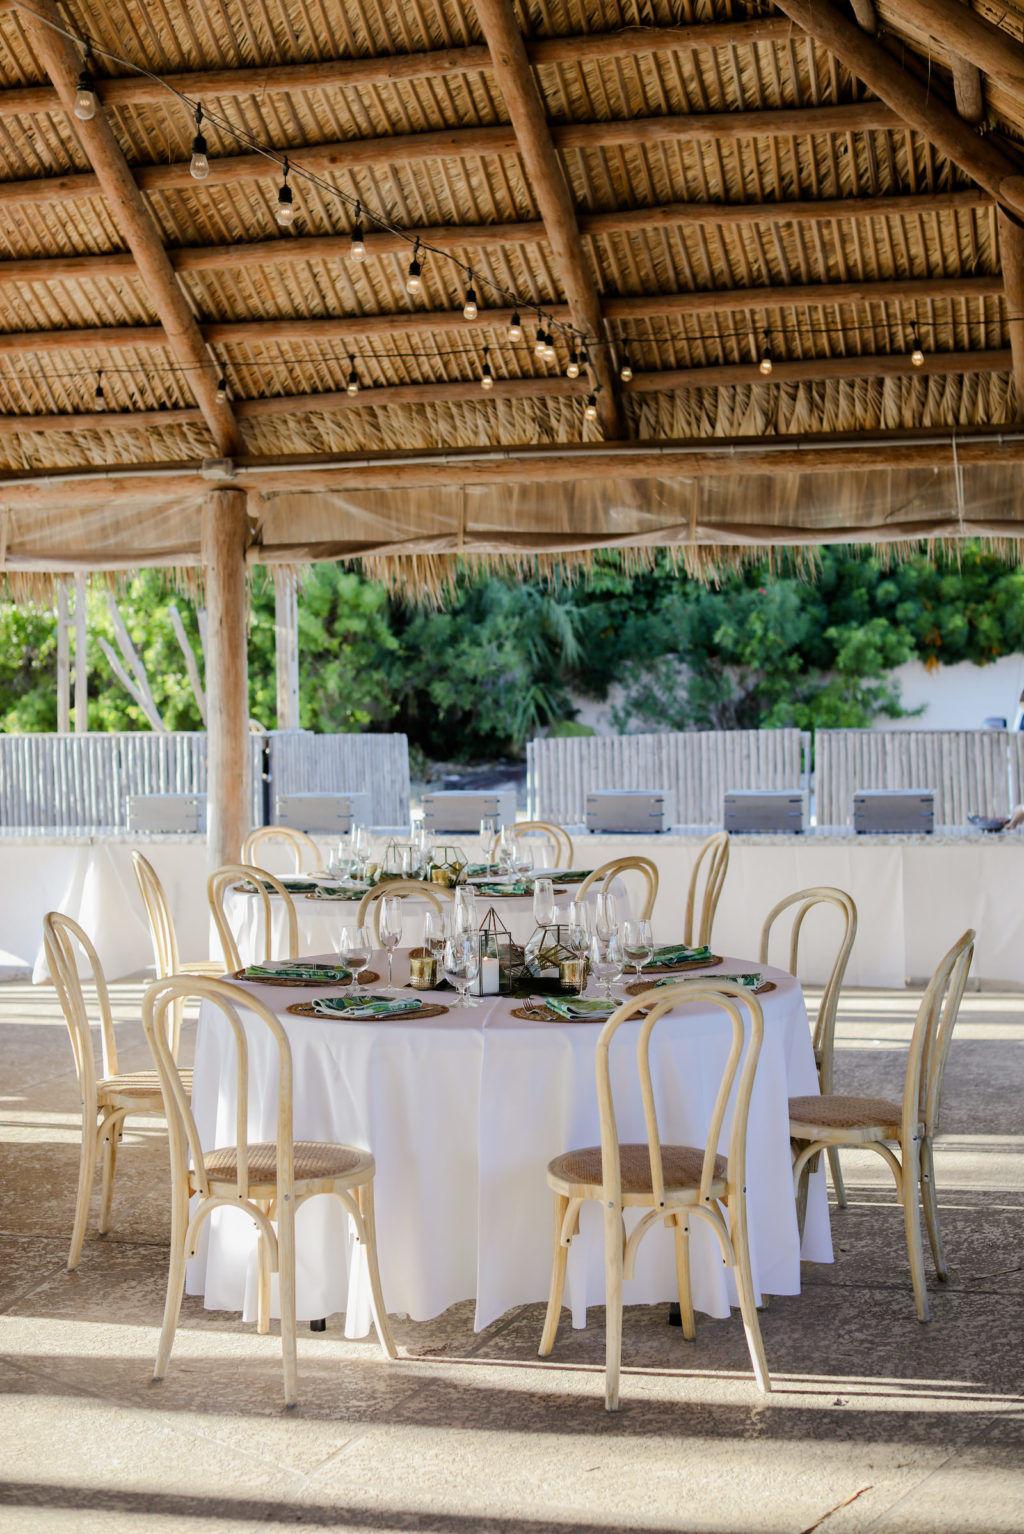 Tropical Wedding Reception Decor, Round Tables with White Linen Tablecloths, Wooden Bamboo Chairs, Hanging String Lights| | St. Pete Beach Wedding Venue Postcard Inn on the Beach | Tampa Bay Wedding Photographer Lifelong Photography Studio